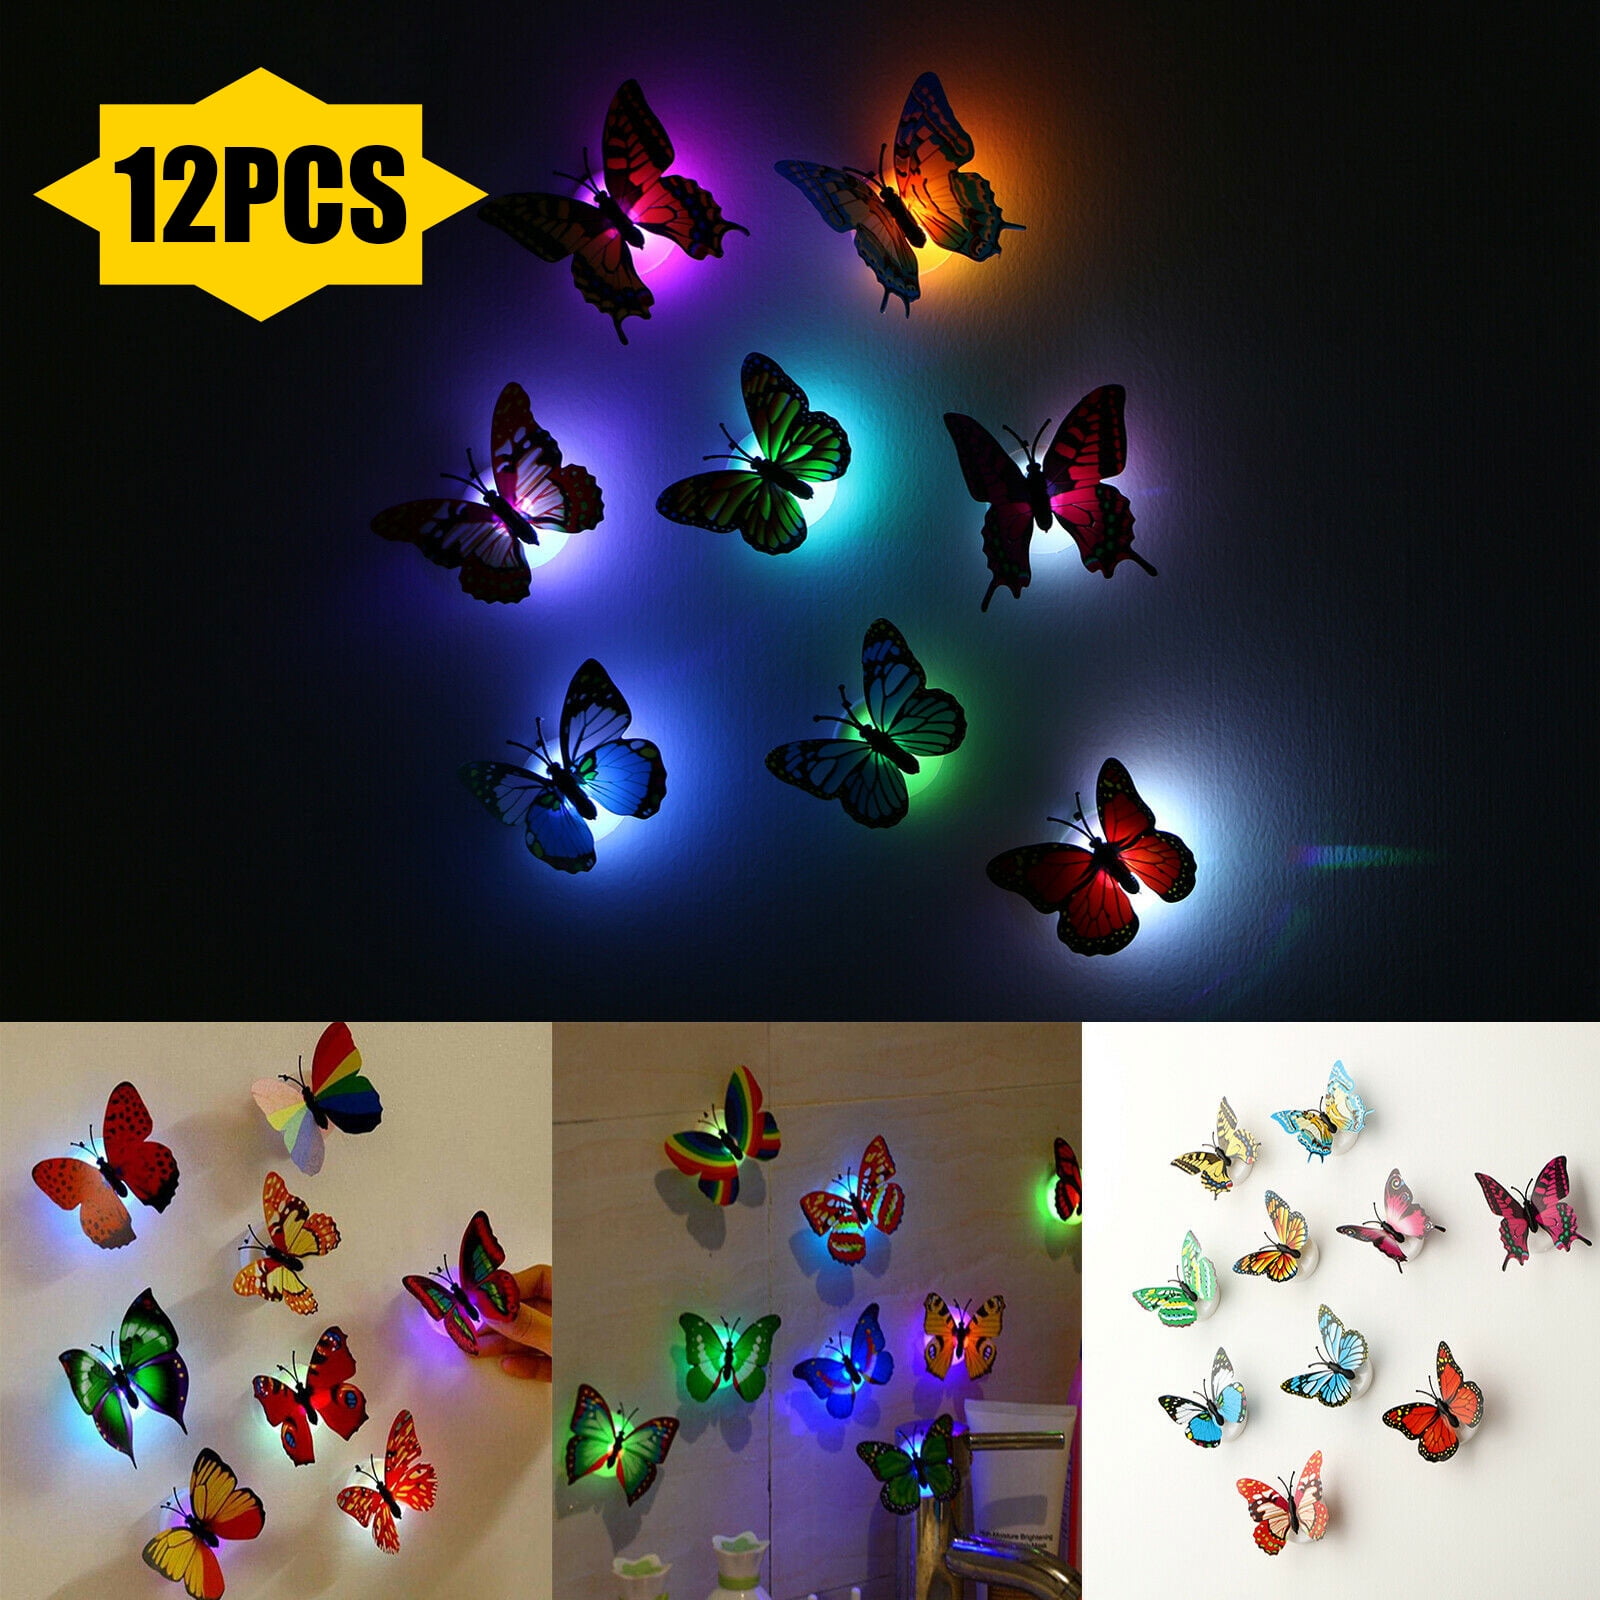 12 pcs 3D Butterfly Wall Stickers Colorful Art Decal Room Decorations Decor DIY 